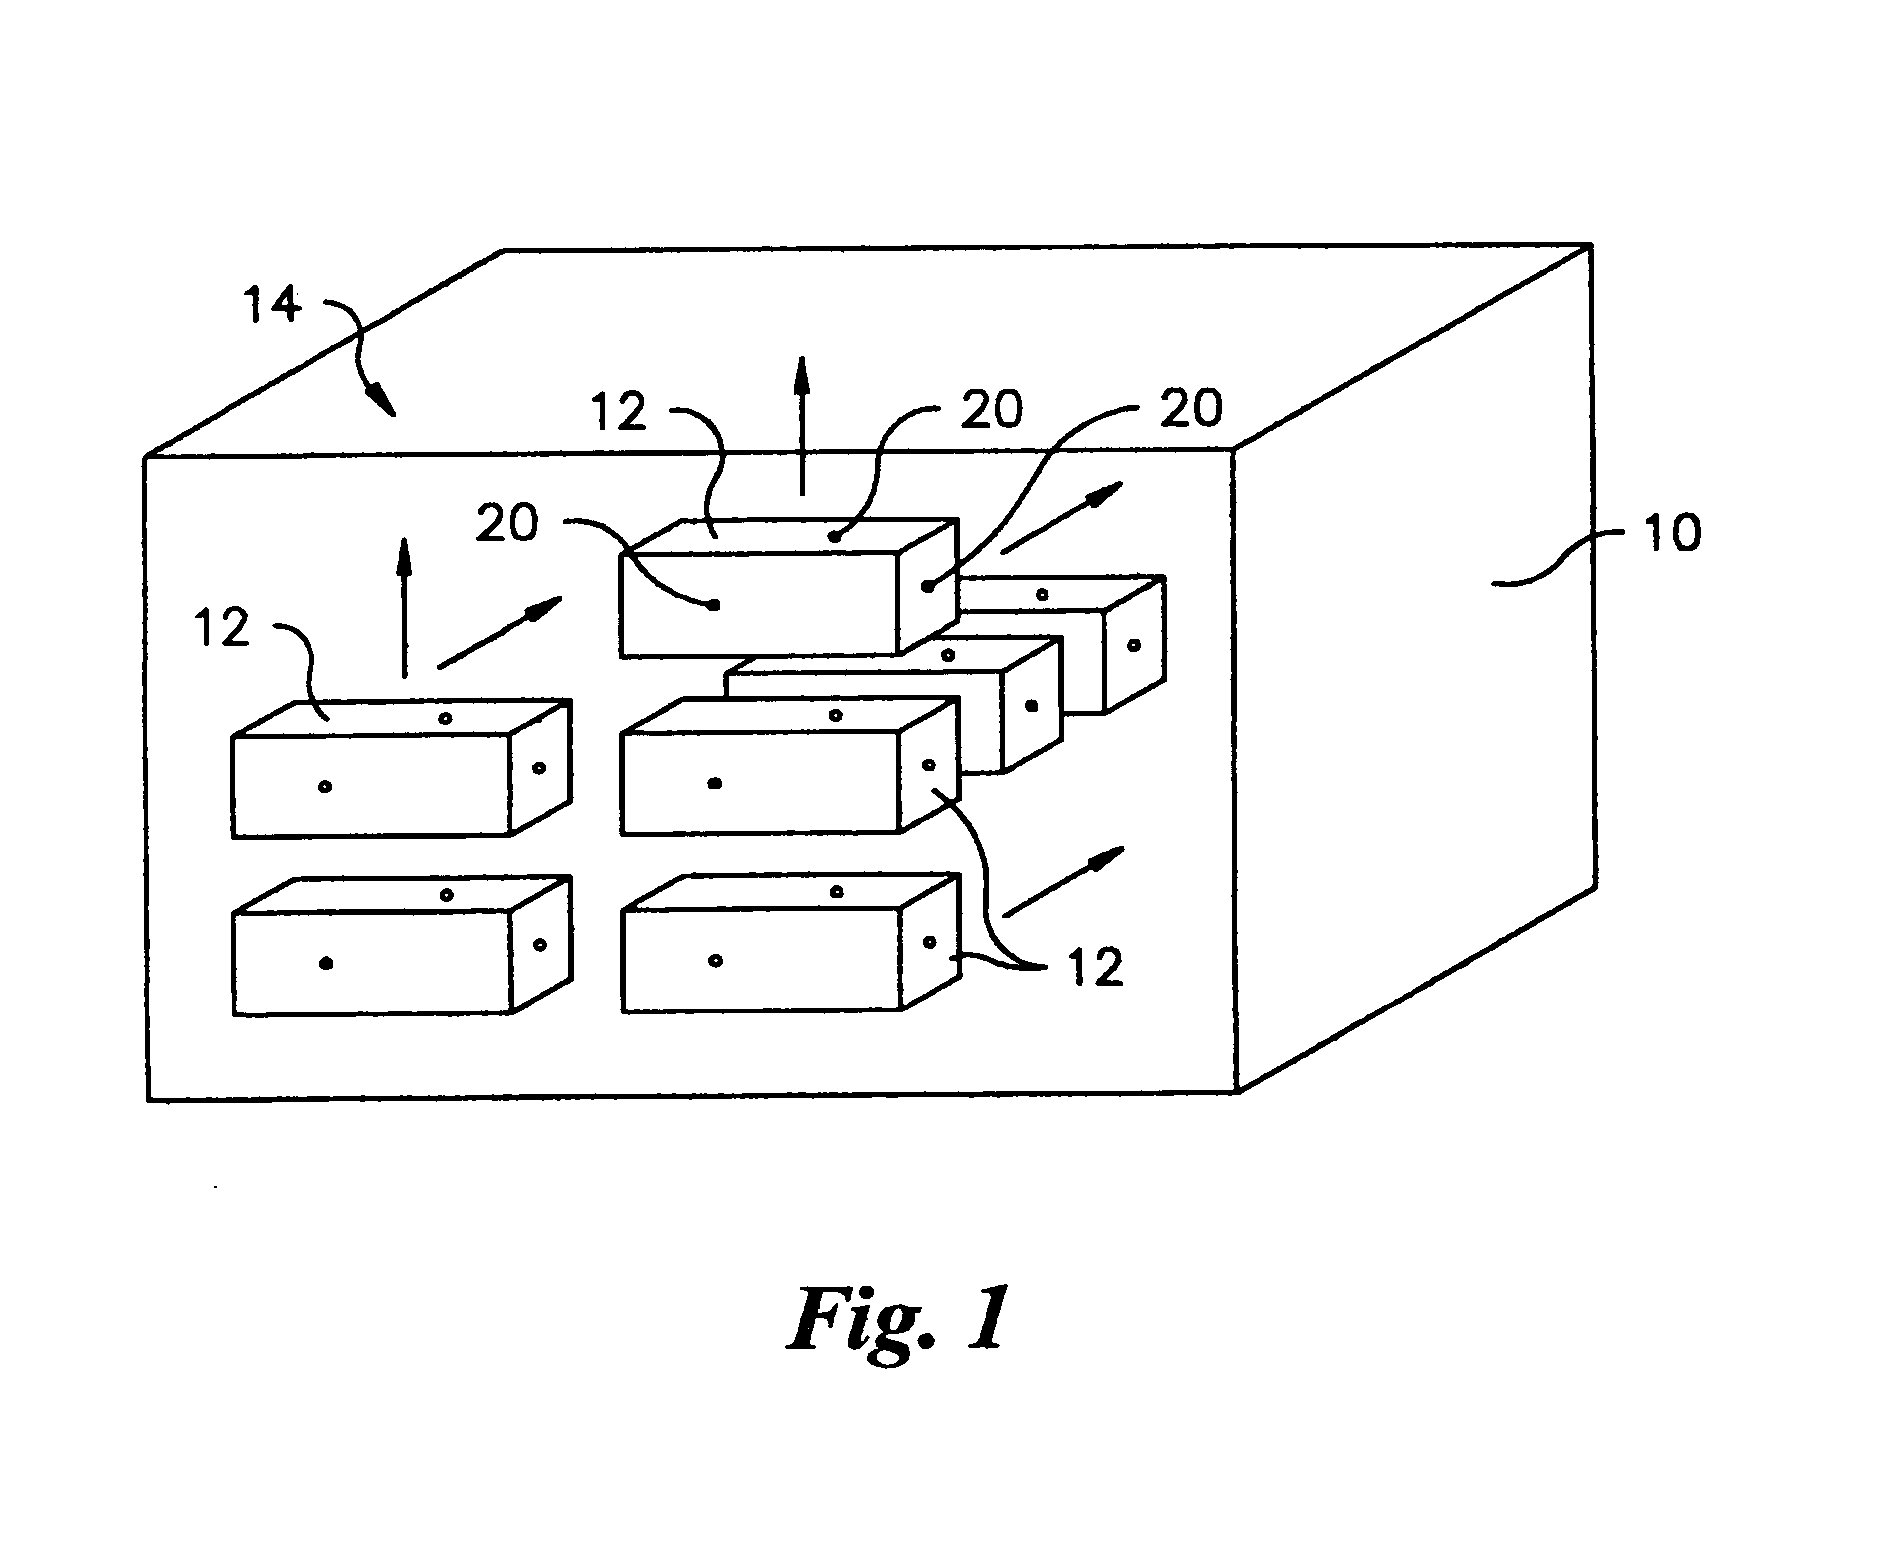 Method and apparatus for detection of radioactive material